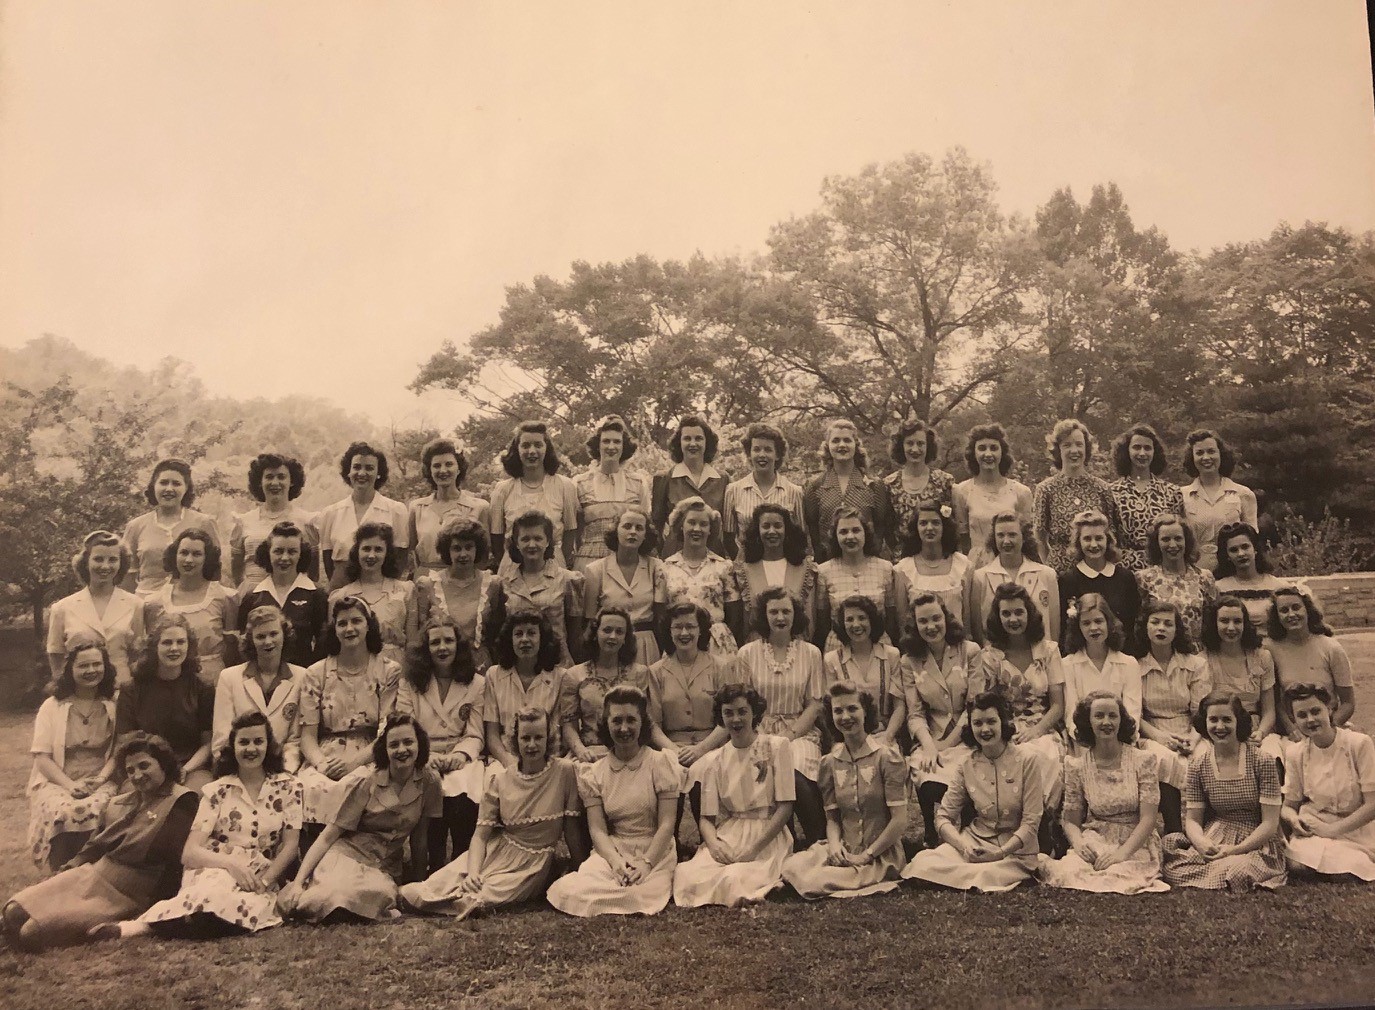 The Class of 1944, pictured as freshmen, with Shirley (top row, second from left) and Mary Agnes (second row, sixth from right). Photos courtesy of Lois Perch Villemaire.